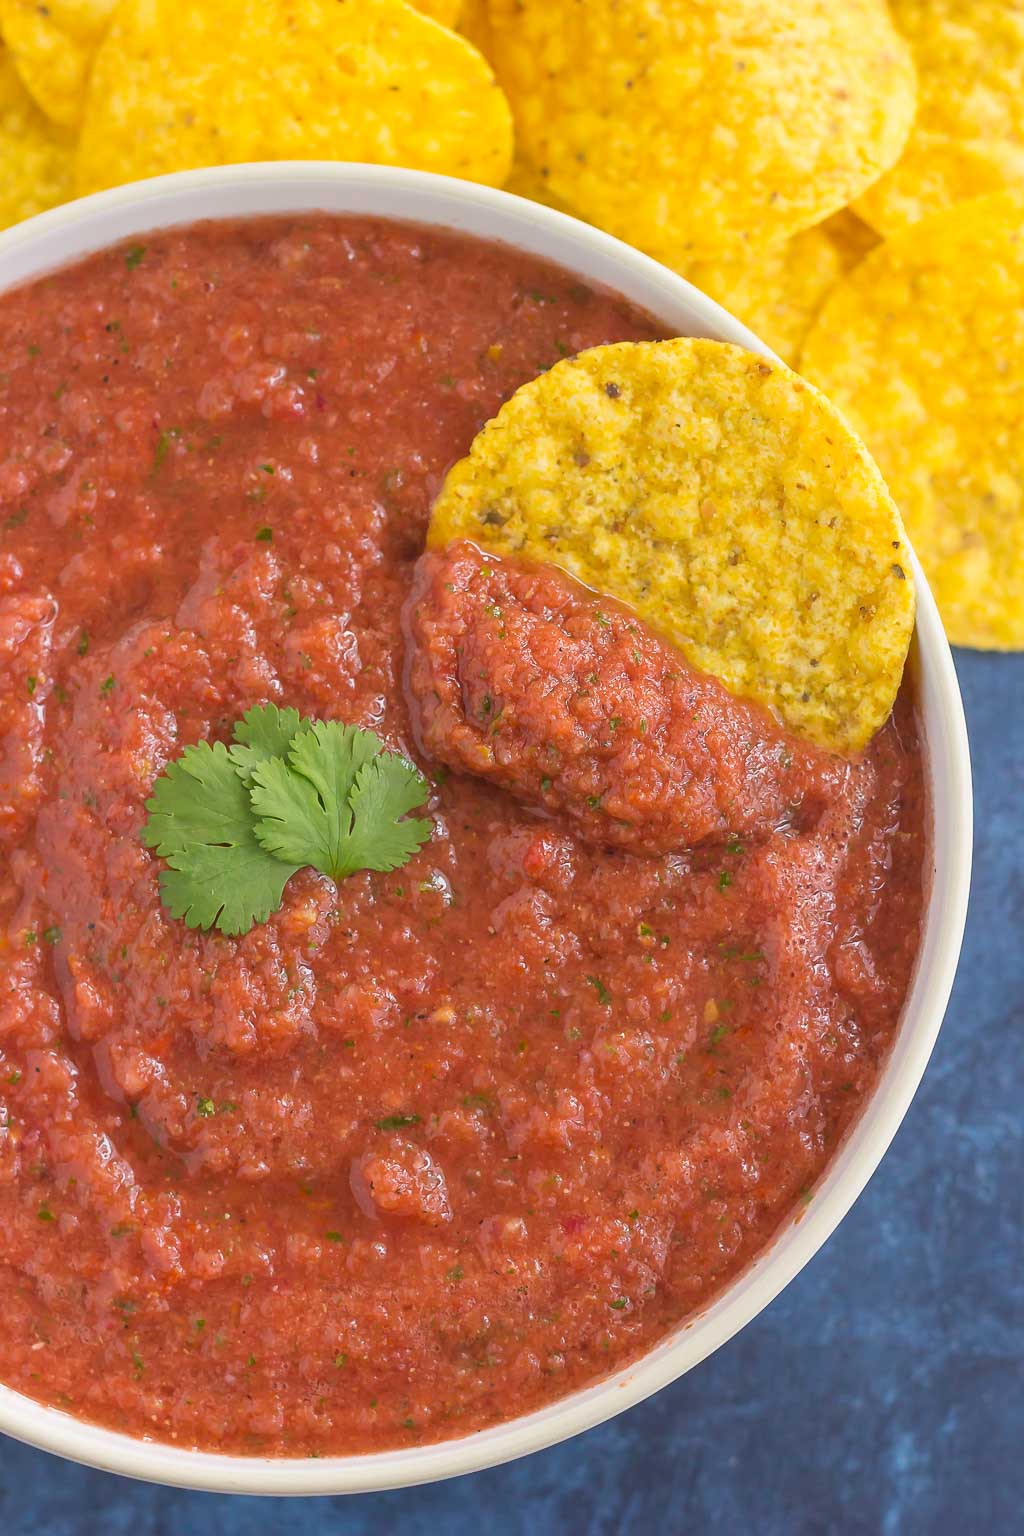 tortilla chip dunked in bowl of restaurant style salsa